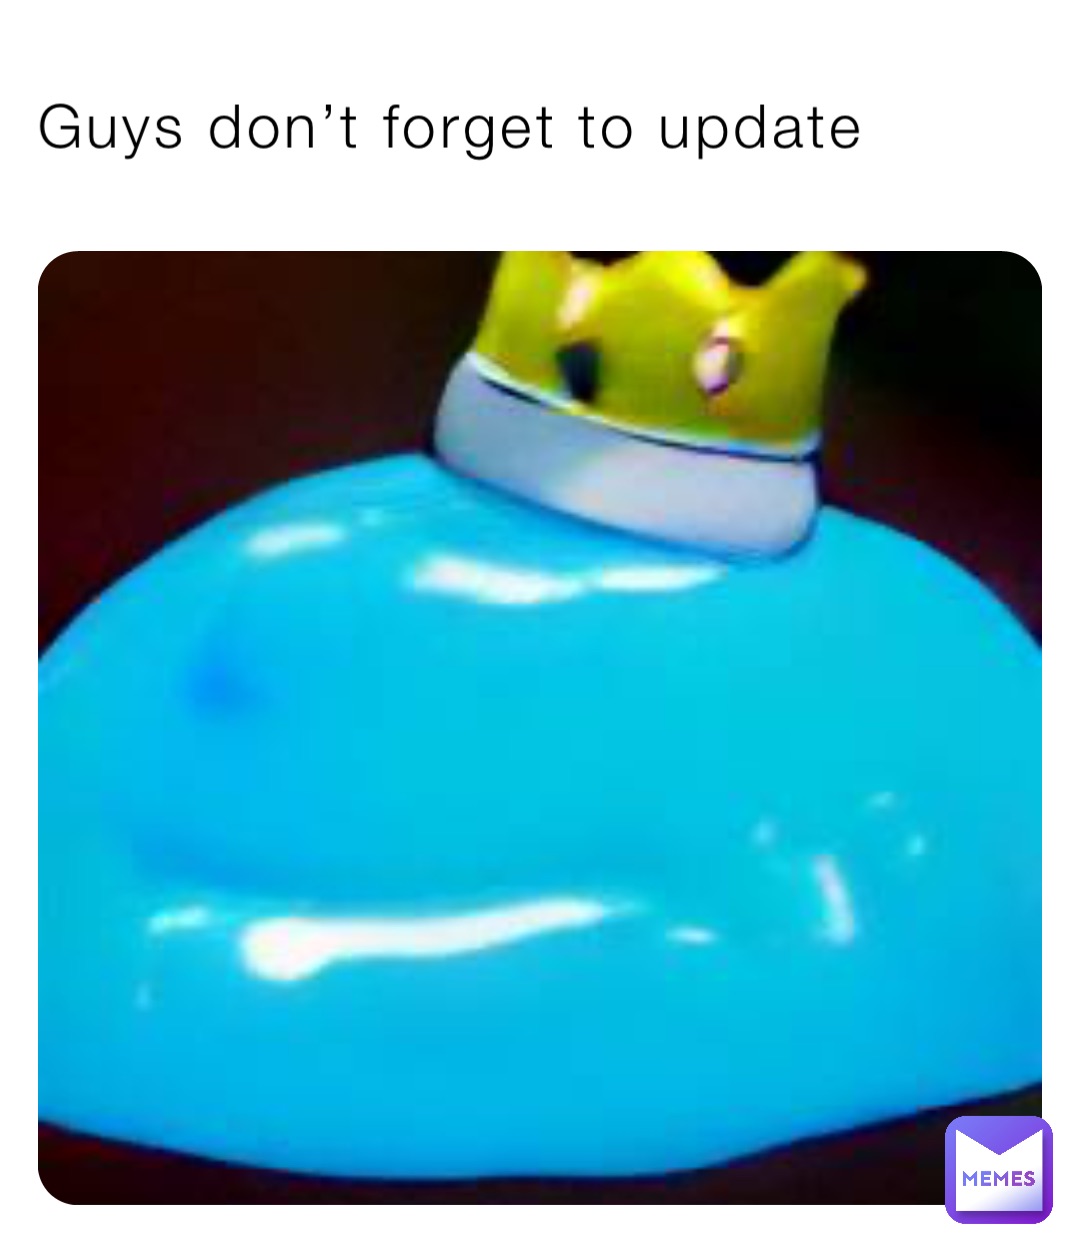 Guys don’t forget to update